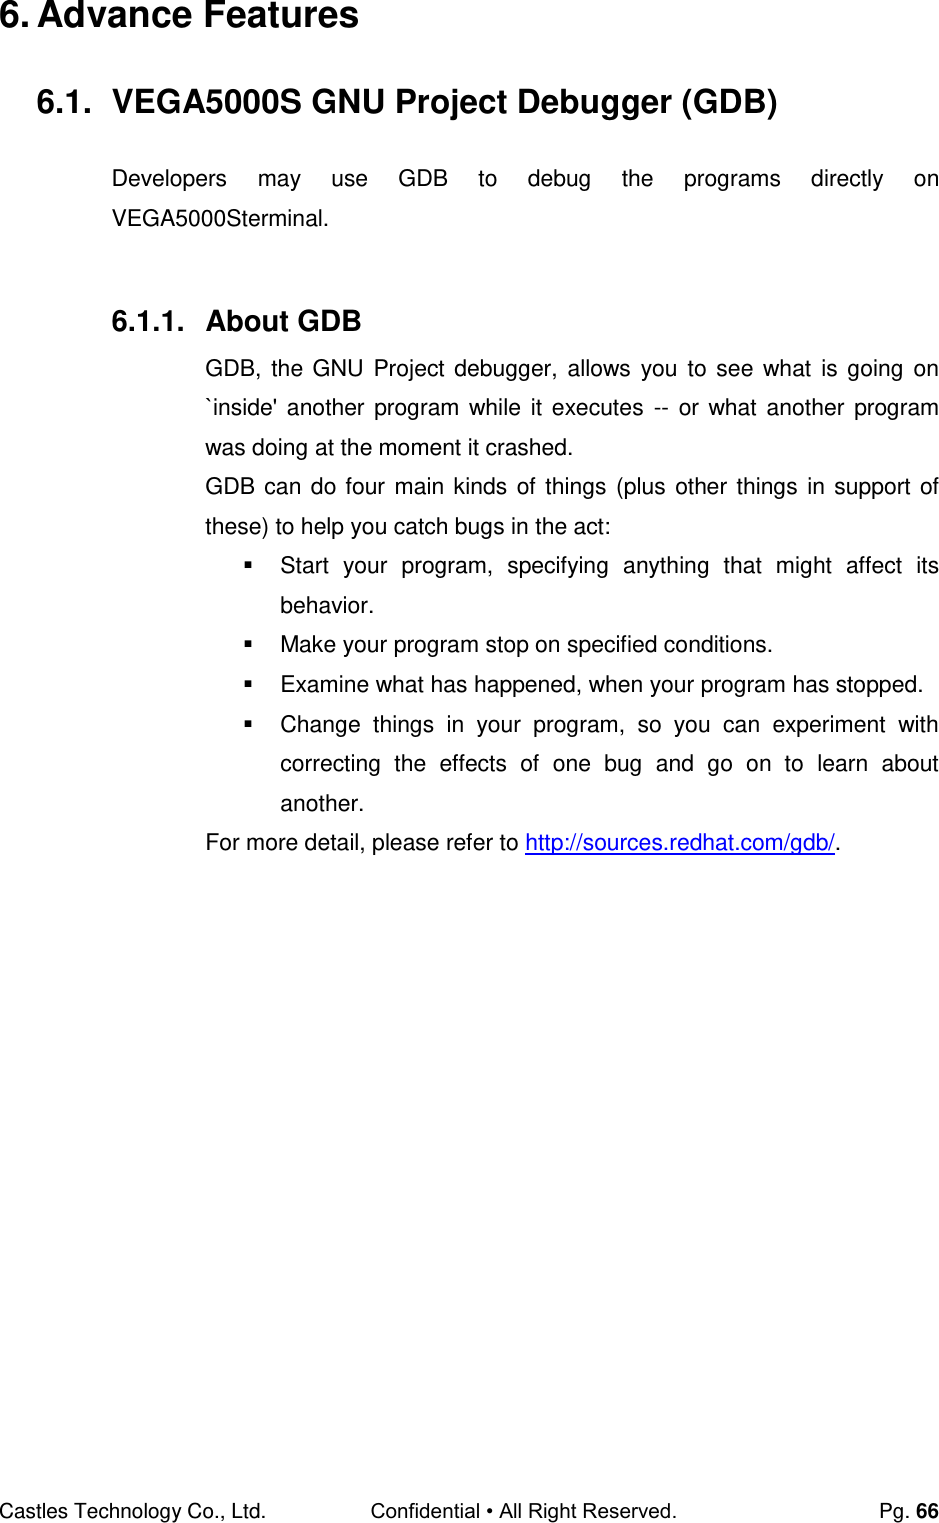 Castles Technology Co., Ltd. Confidential • All Right Reserved.  Pg. 66 6. Advance Features 6.1.  VEGA5000S GNU Project Debugger (GDB) Developers  may  use  GDB  to  debug  the  programs  directly  on VEGA5000Sterminal.  6.1.1.  About GDB GDB, the GNU Project debugger, allows you  to see what  is going  on `inside&apos; another program while it  executes  --  or what another program was doing at the moment it crashed. GDB can do four main kinds of things (plus other things in support of these) to help you catch bugs in the act:   Start  your  program,  specifying  anything  that  might  affect  its behavior.   Make your program stop on specified conditions.   Examine what has happened, when your program has stopped.   Change  things  in  your  program,  so  you  can  experiment  with correcting  the  effects  of  one  bug  and  go  on  to  learn  about another. For more detail, please refer to http://sources.redhat.com/gdb/.    